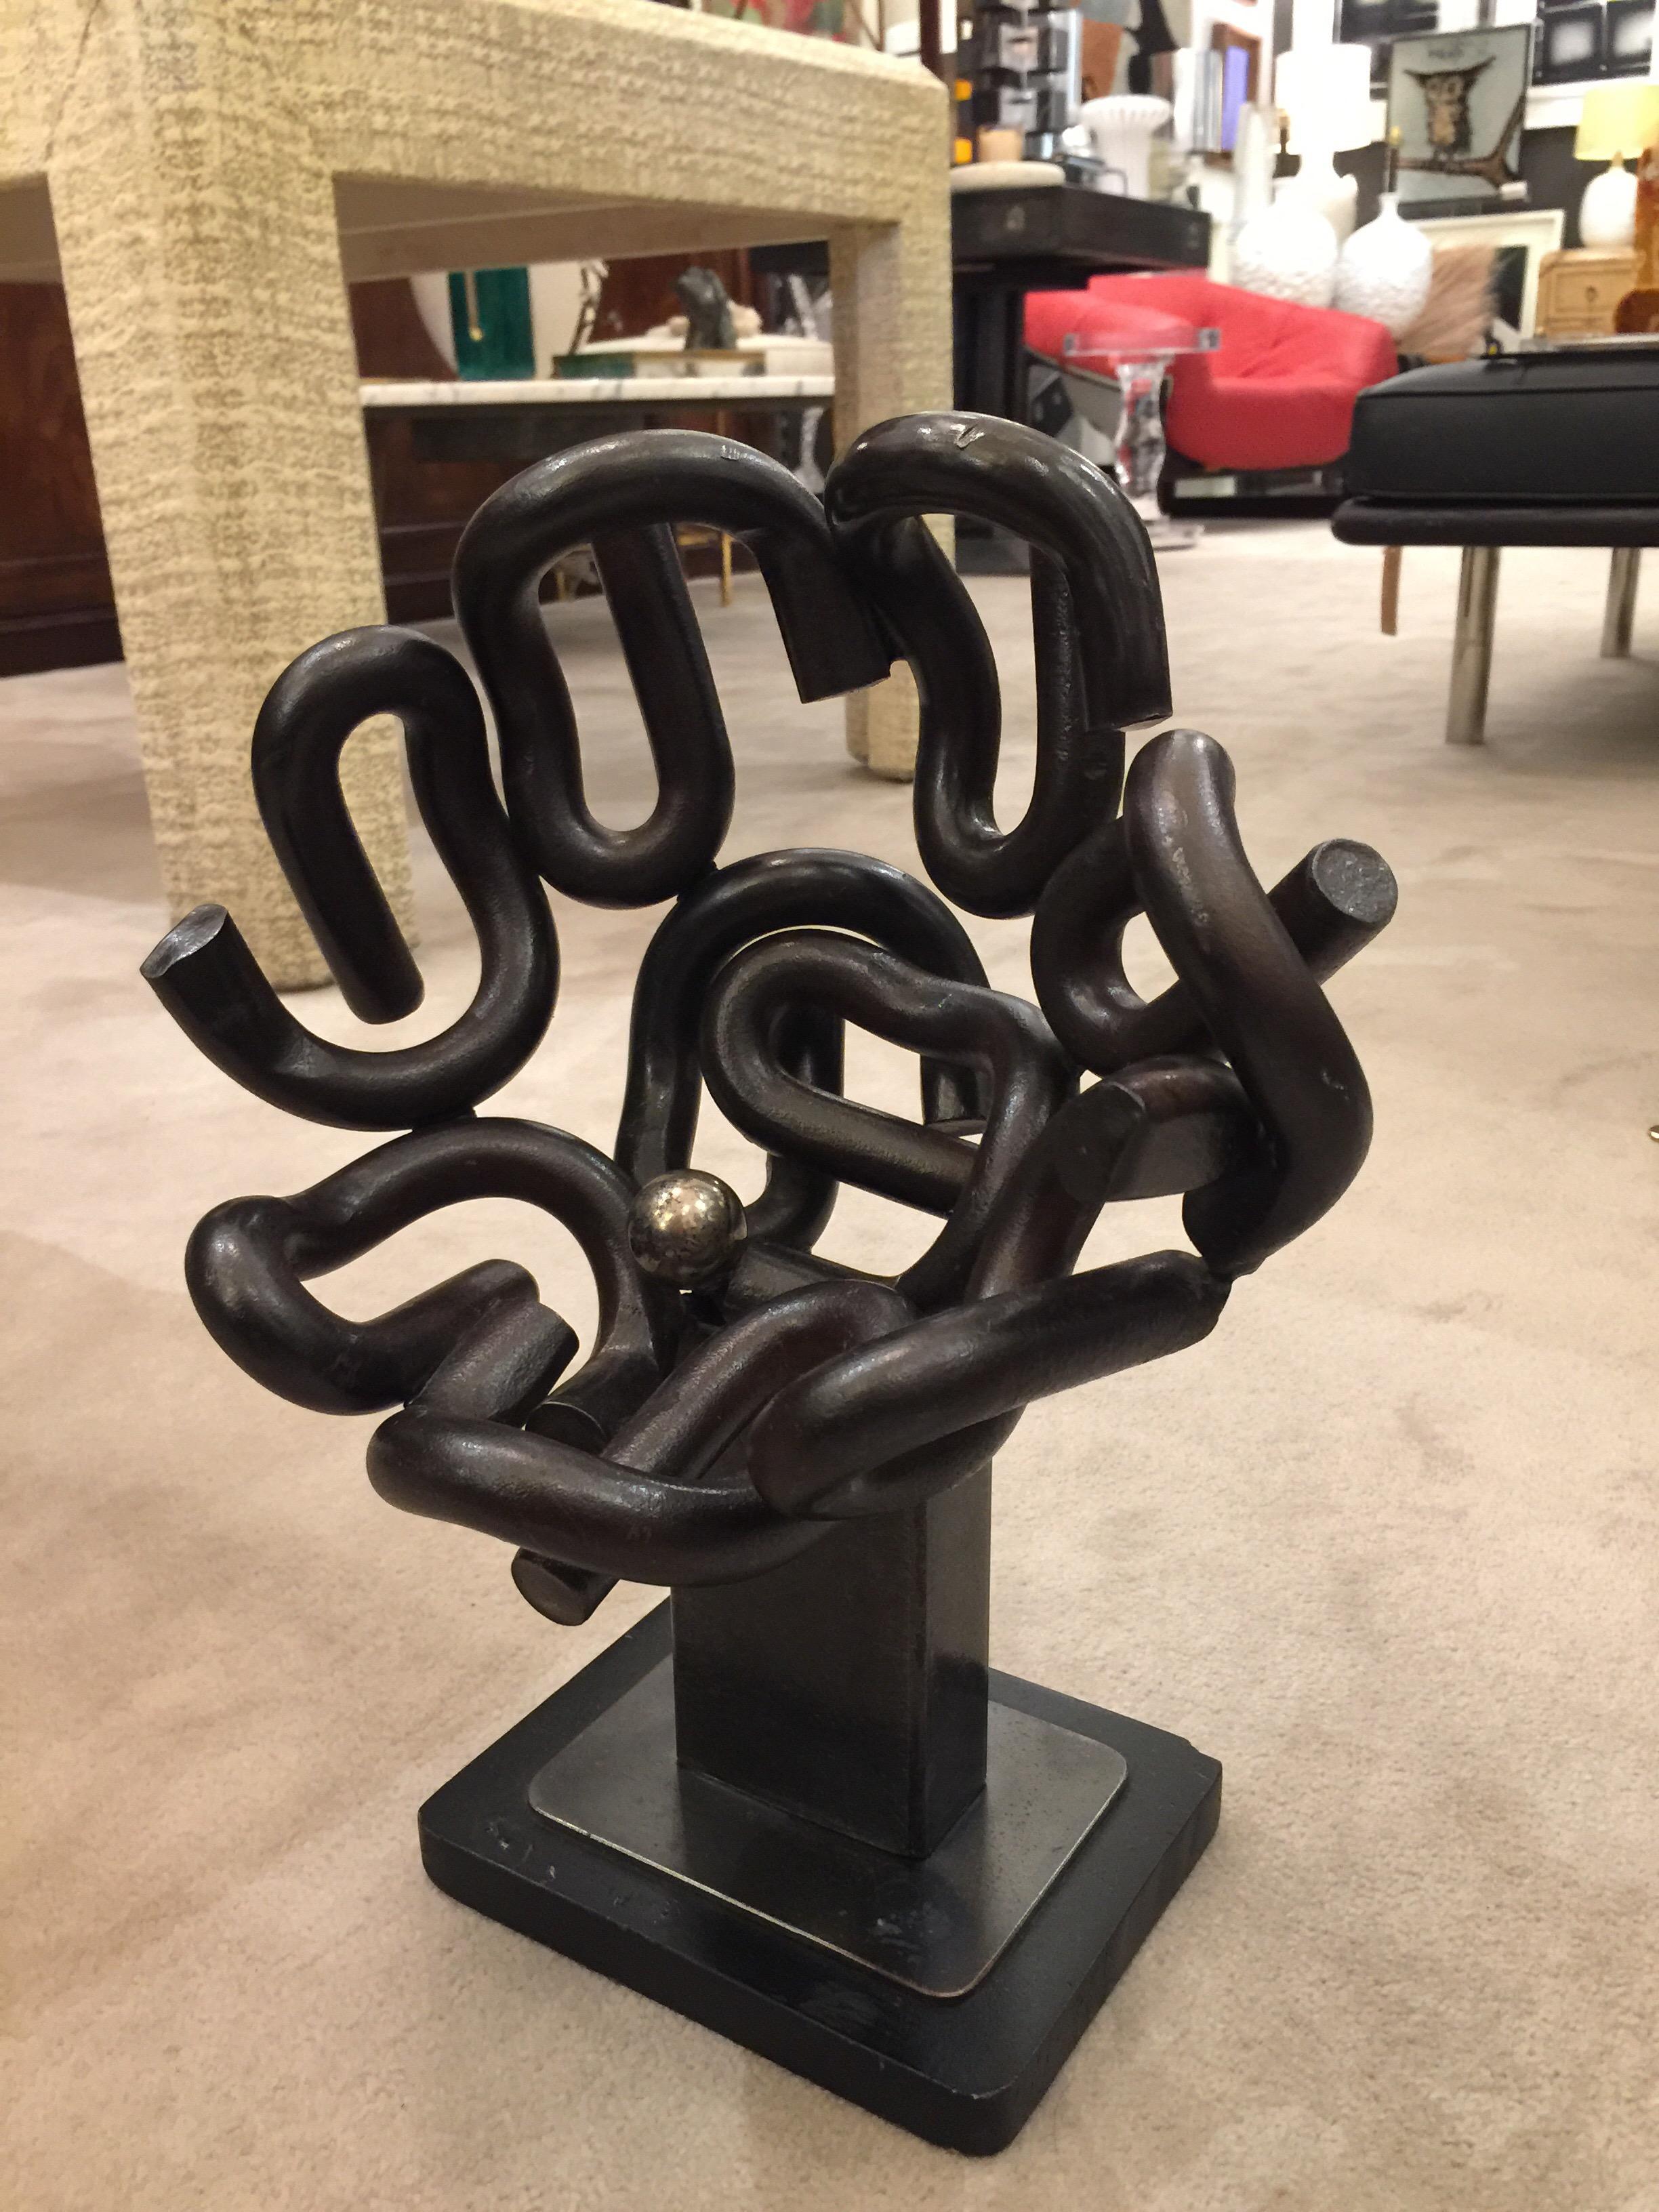 Beautiful and rare iron and brass sculpture in the shape of a large nest in the Postmodern style. Manufactured in the 1970s.
In perfect vintage condition Artist's mark is difficult to decipher. Powerful and yet organic.